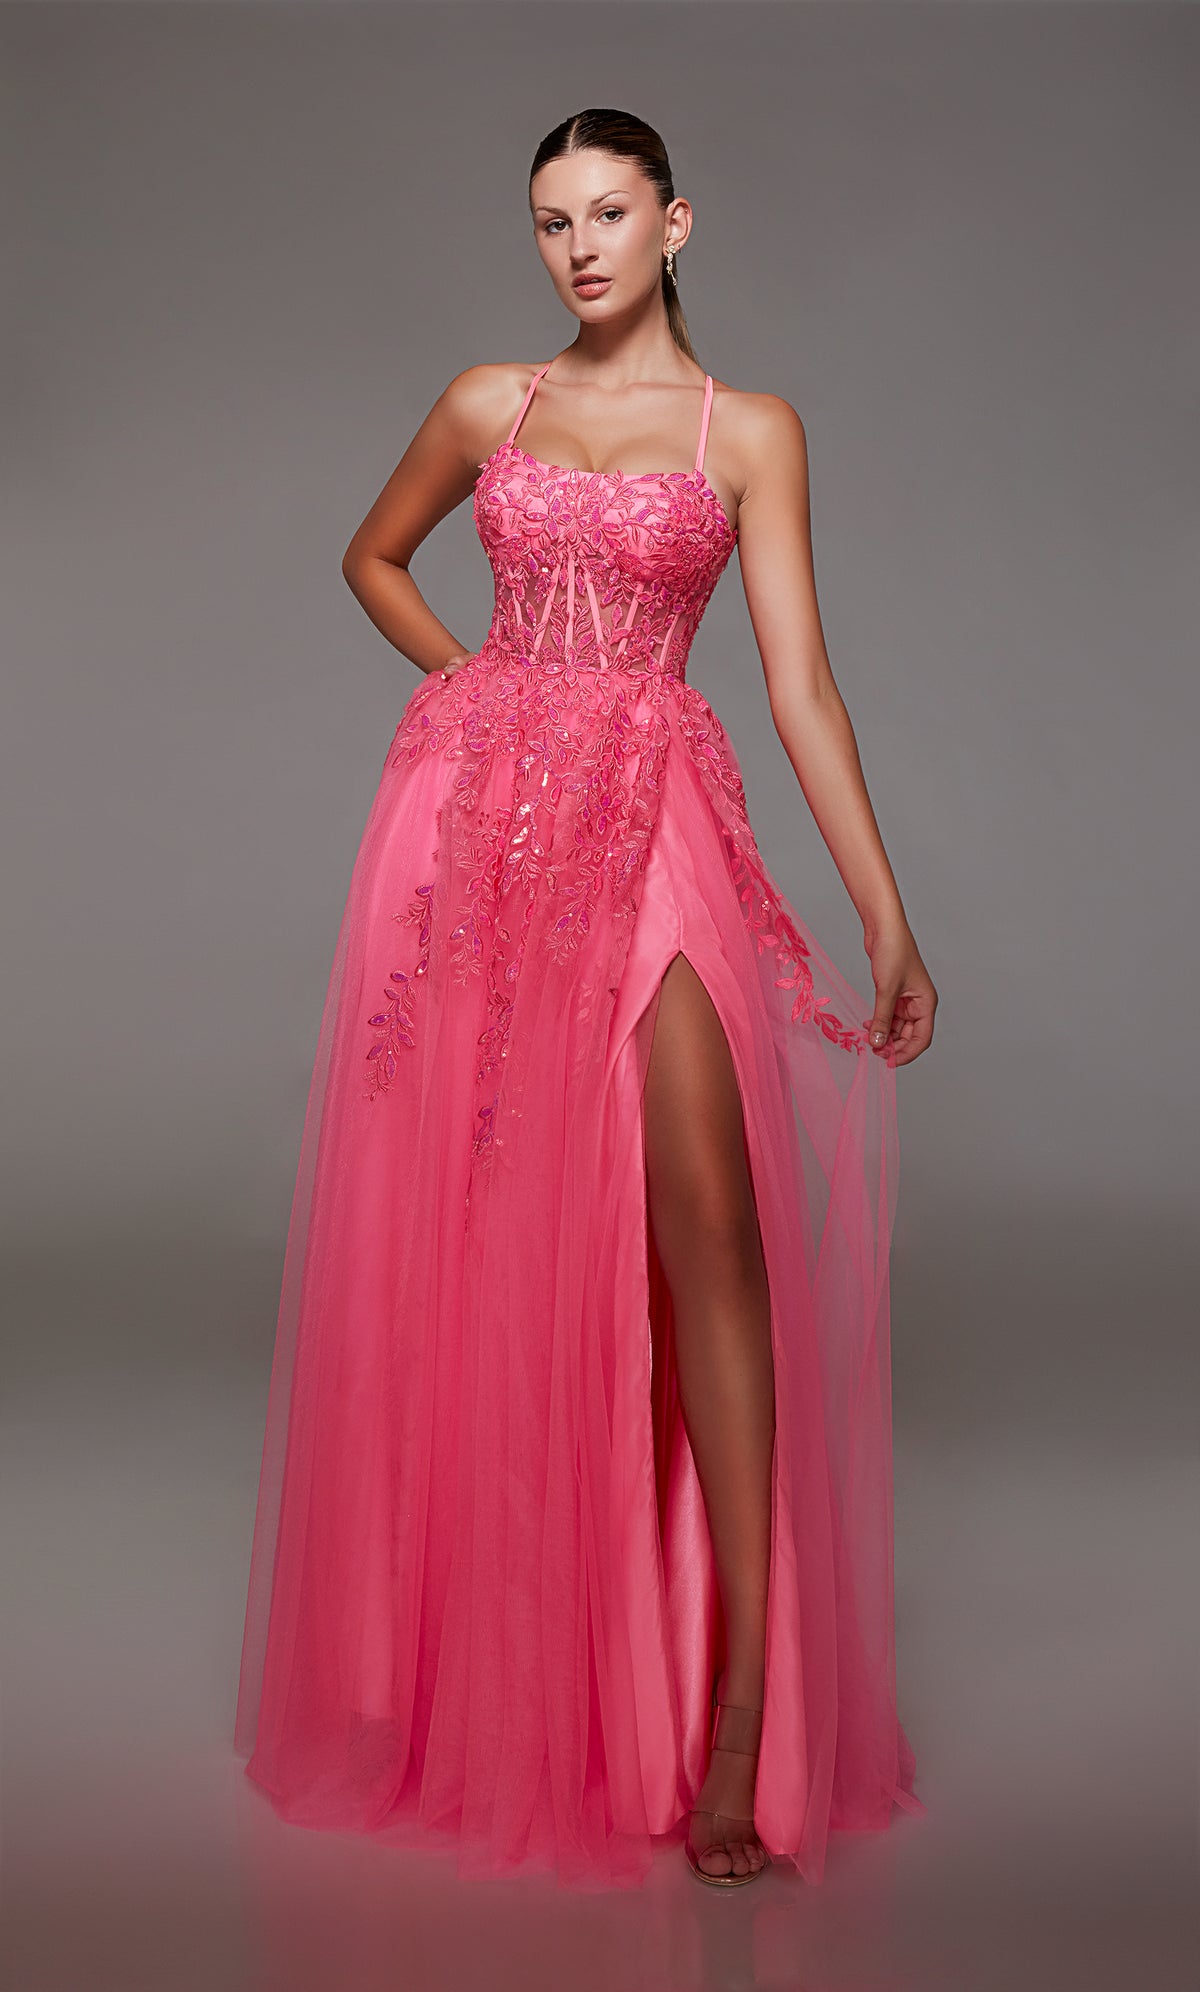 Pink prom dress: sheer corset bodice, full tulle skirt with front slit, lace-up back, and intricate floral lace appliques for an enchanting look.